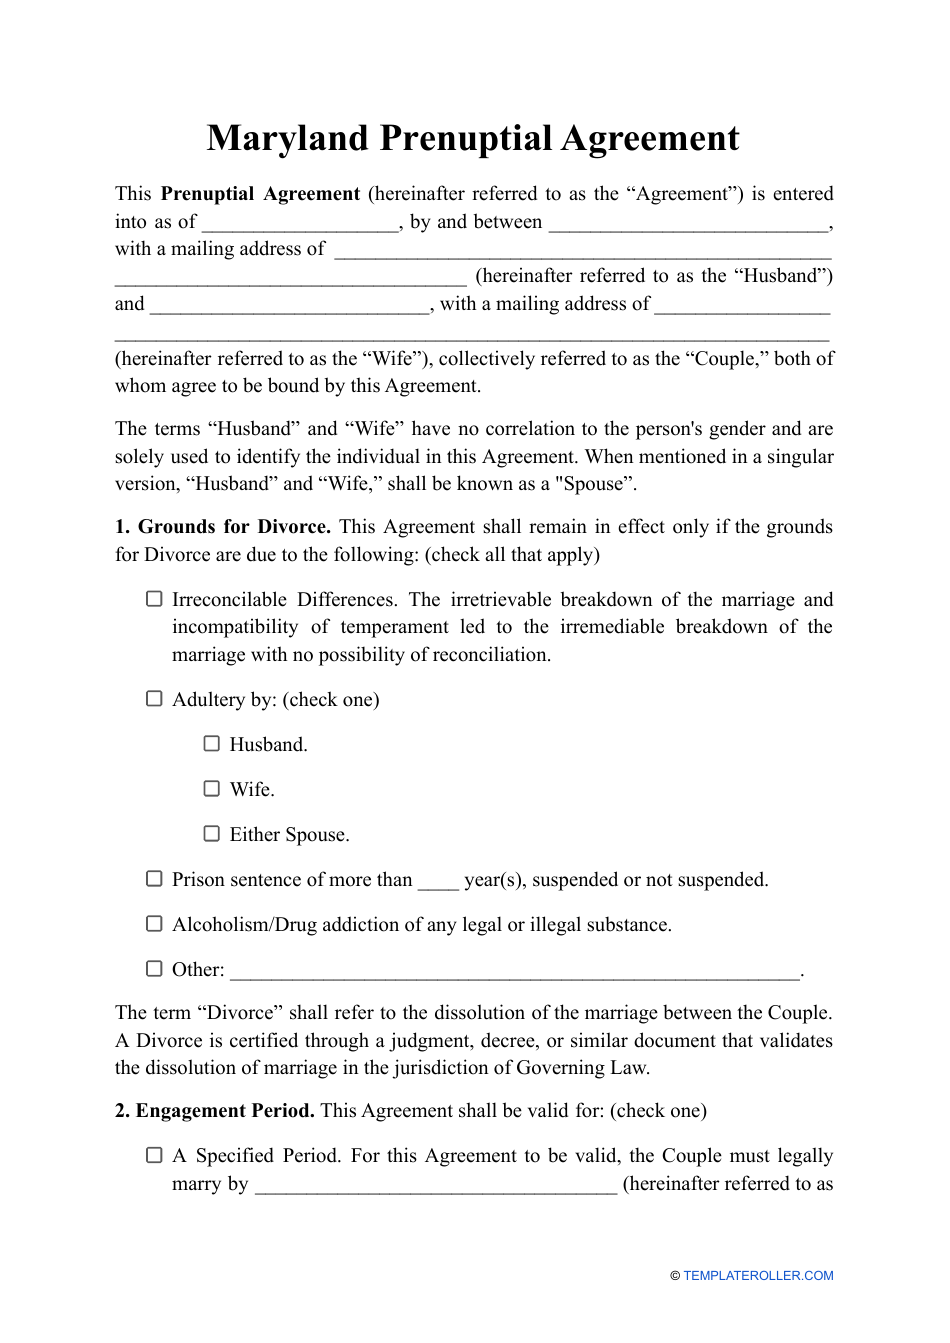 Prenuptial Agreement Template - Maryland, Page 1